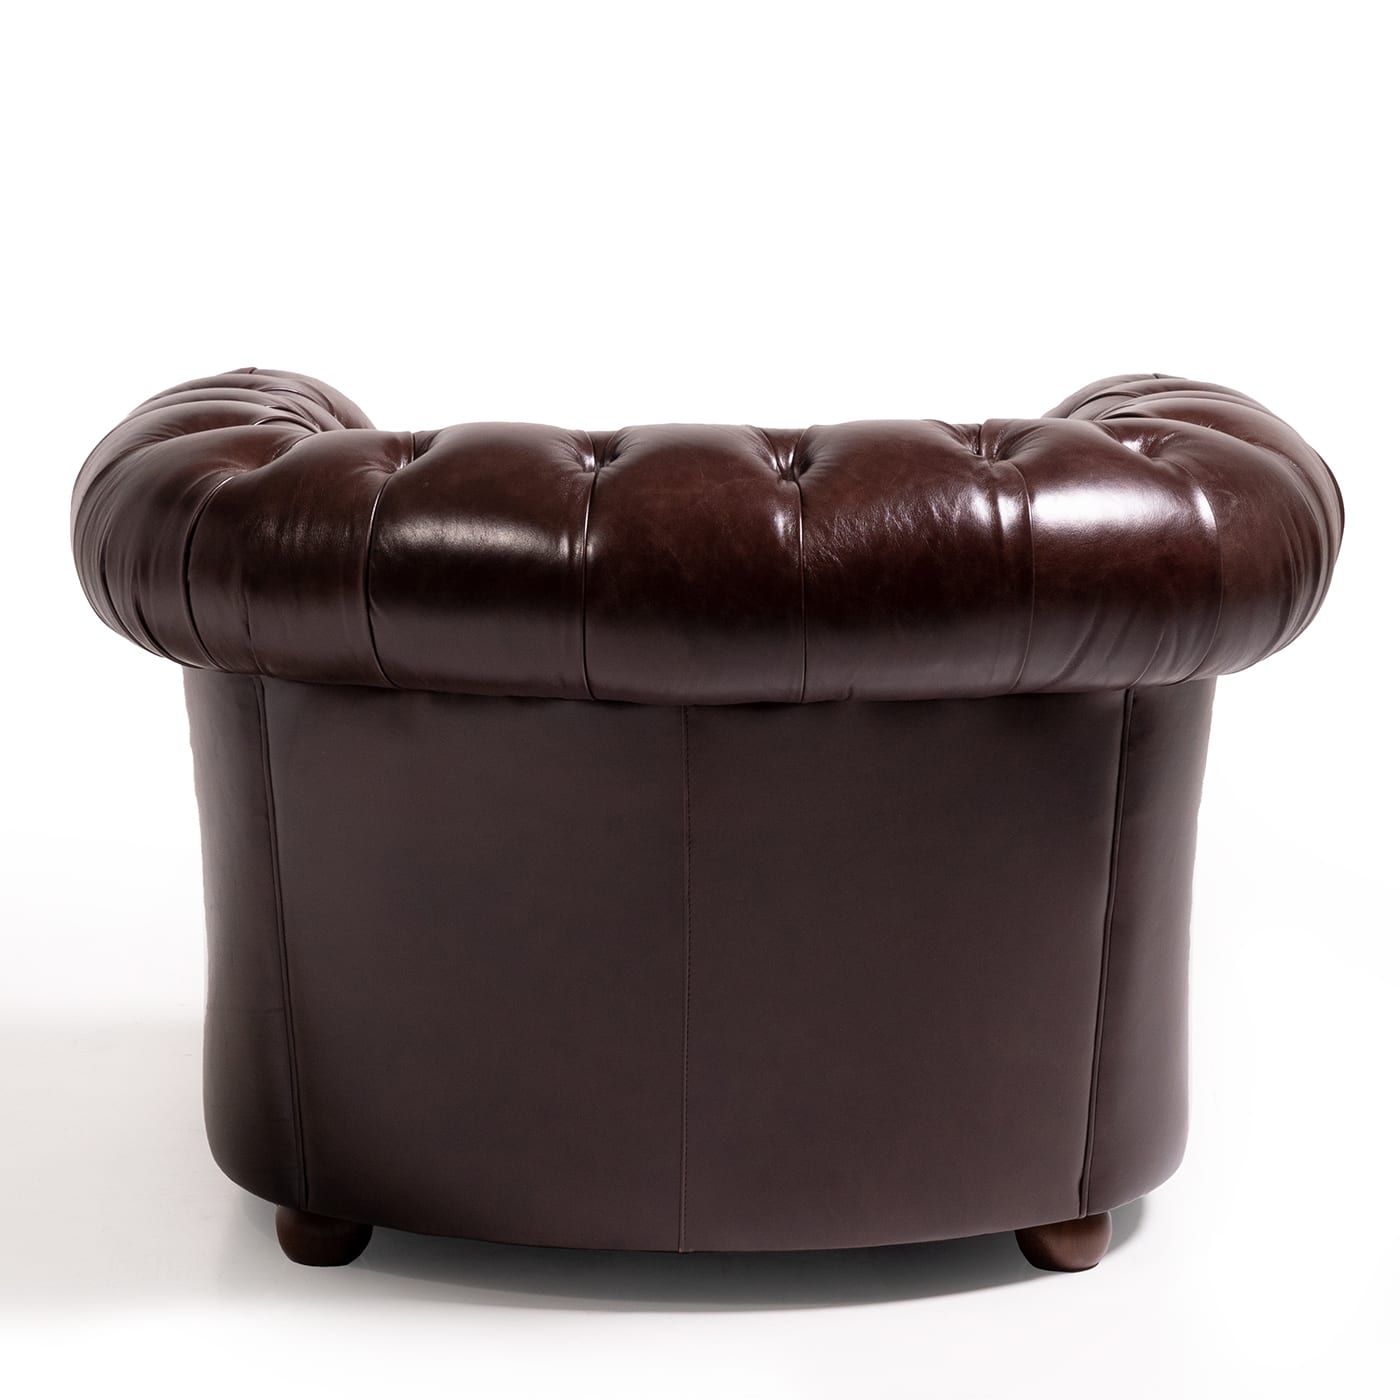 Chesterfield Brown Leather Armchair - Mantellassi 1926